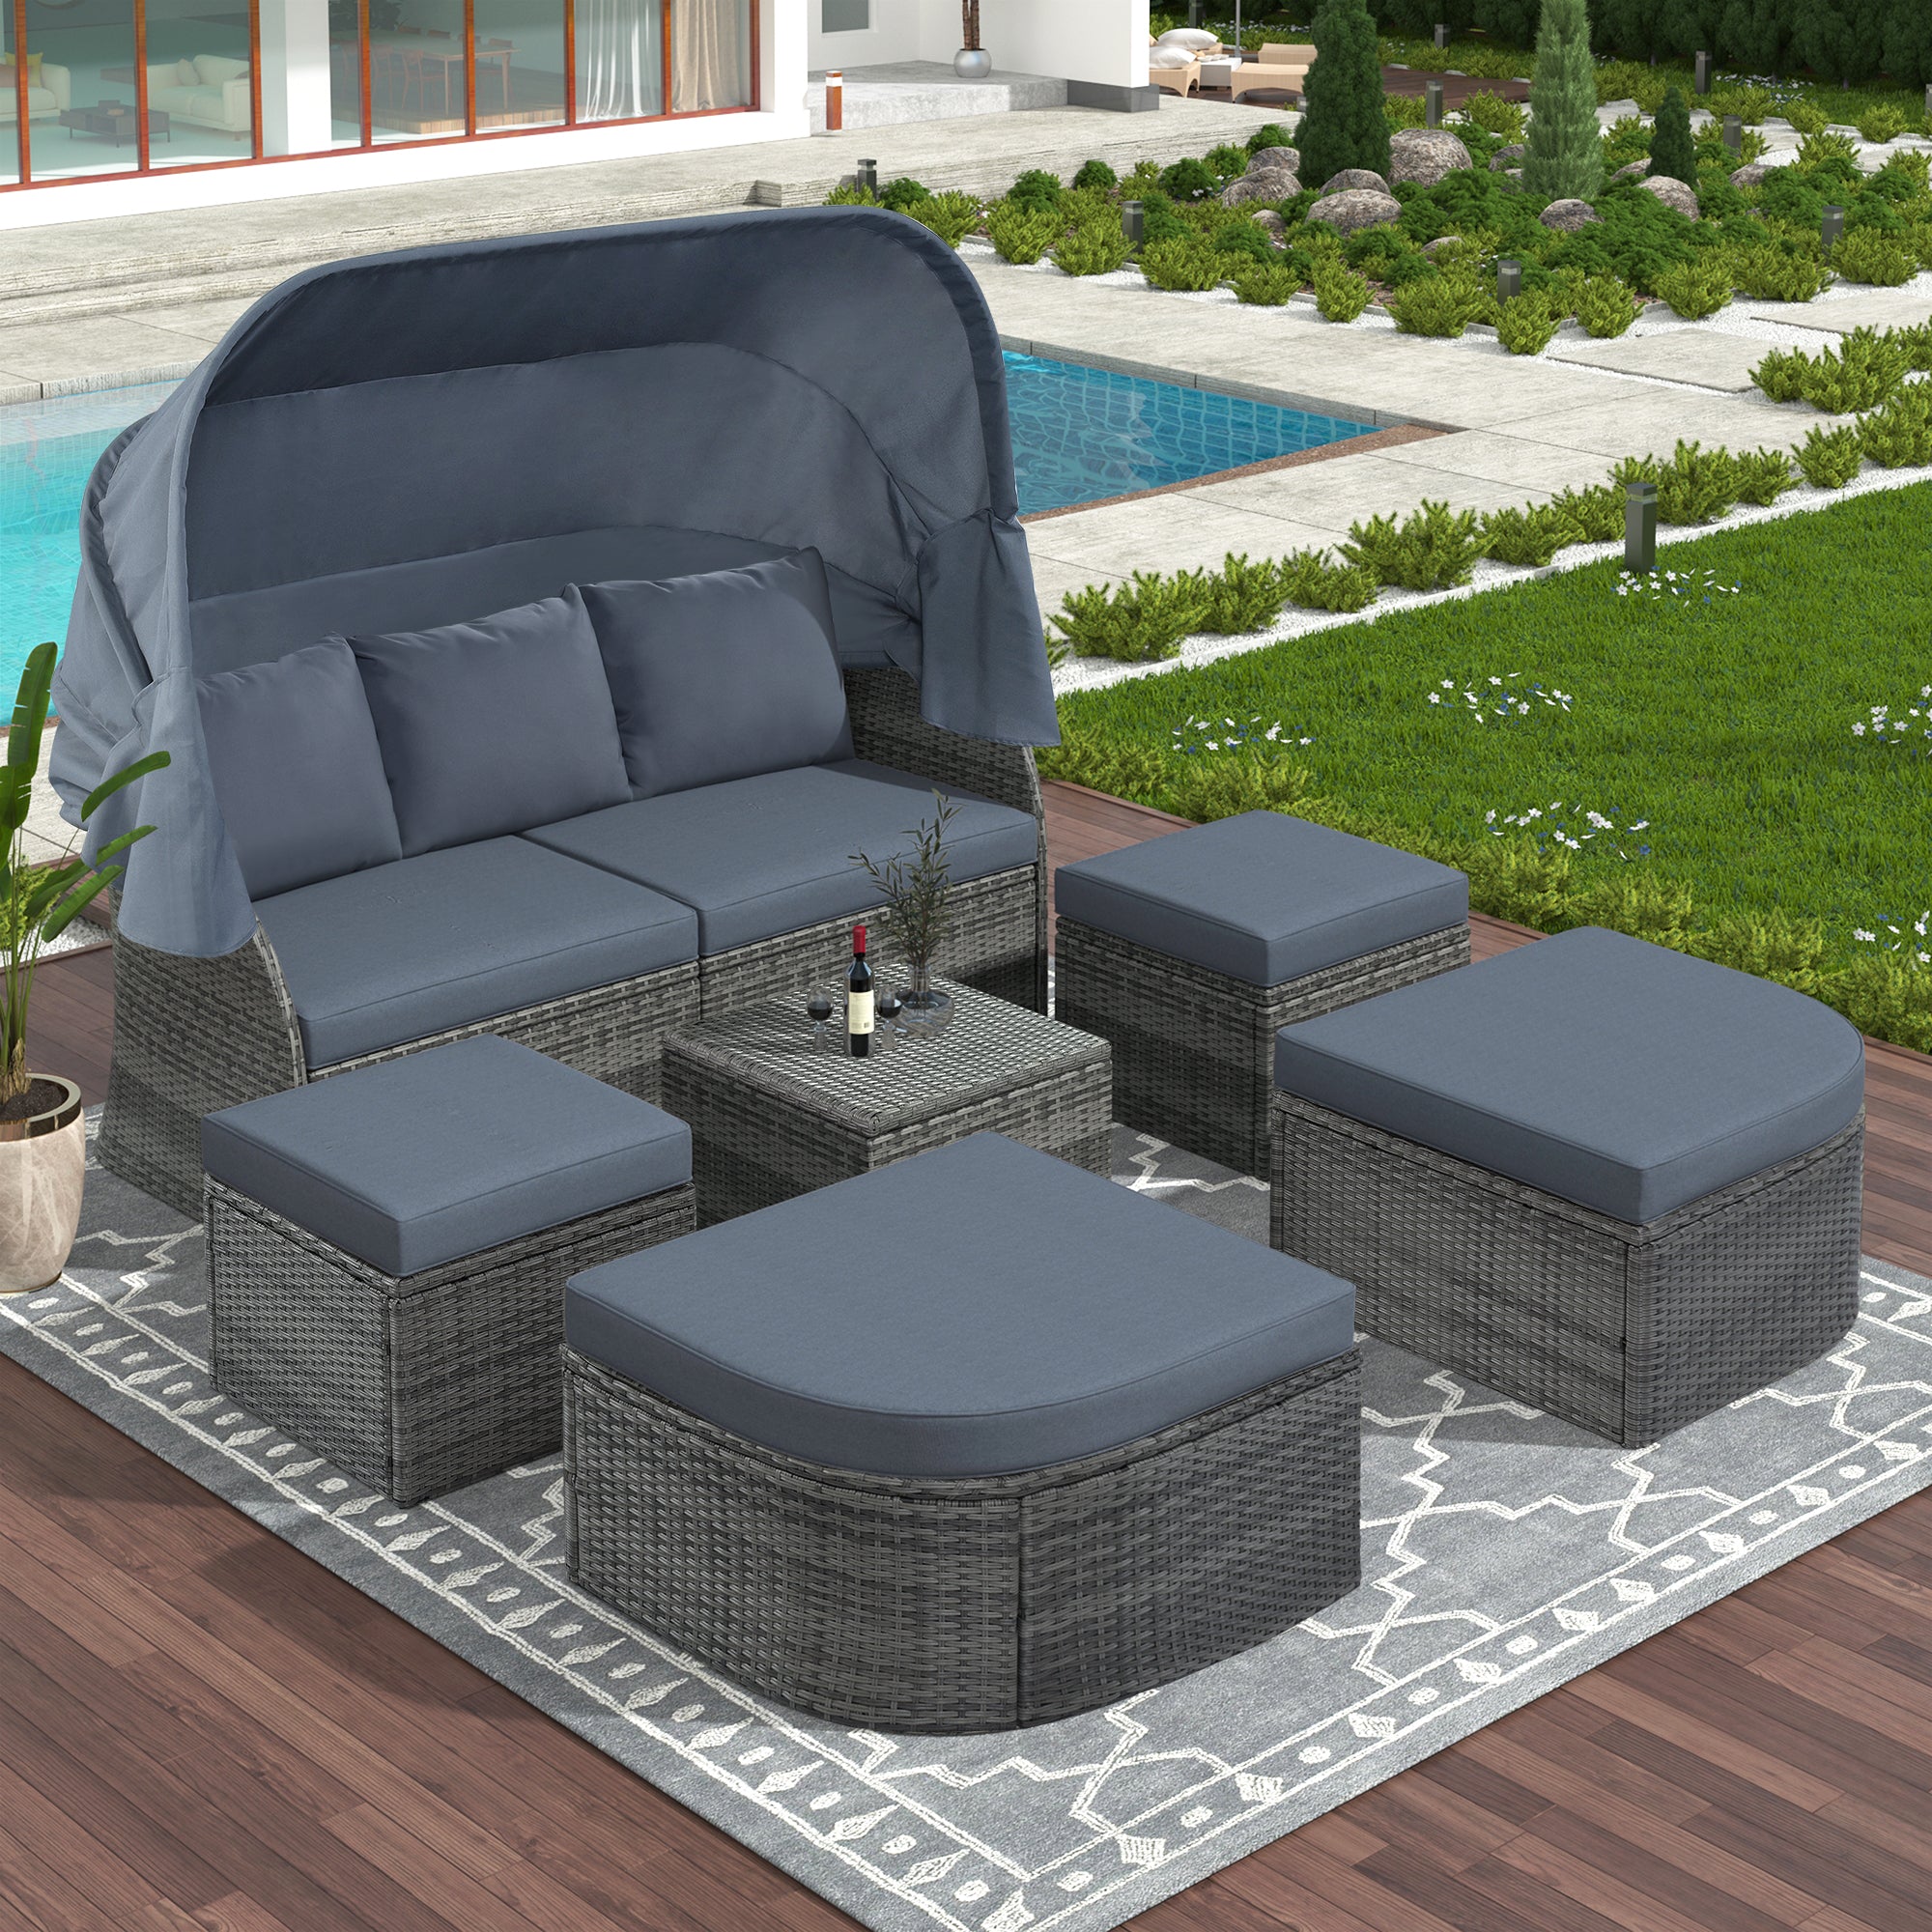 U STYLE Outdoor Patio Furniture Set Daybed Sunbed with gray-rattan